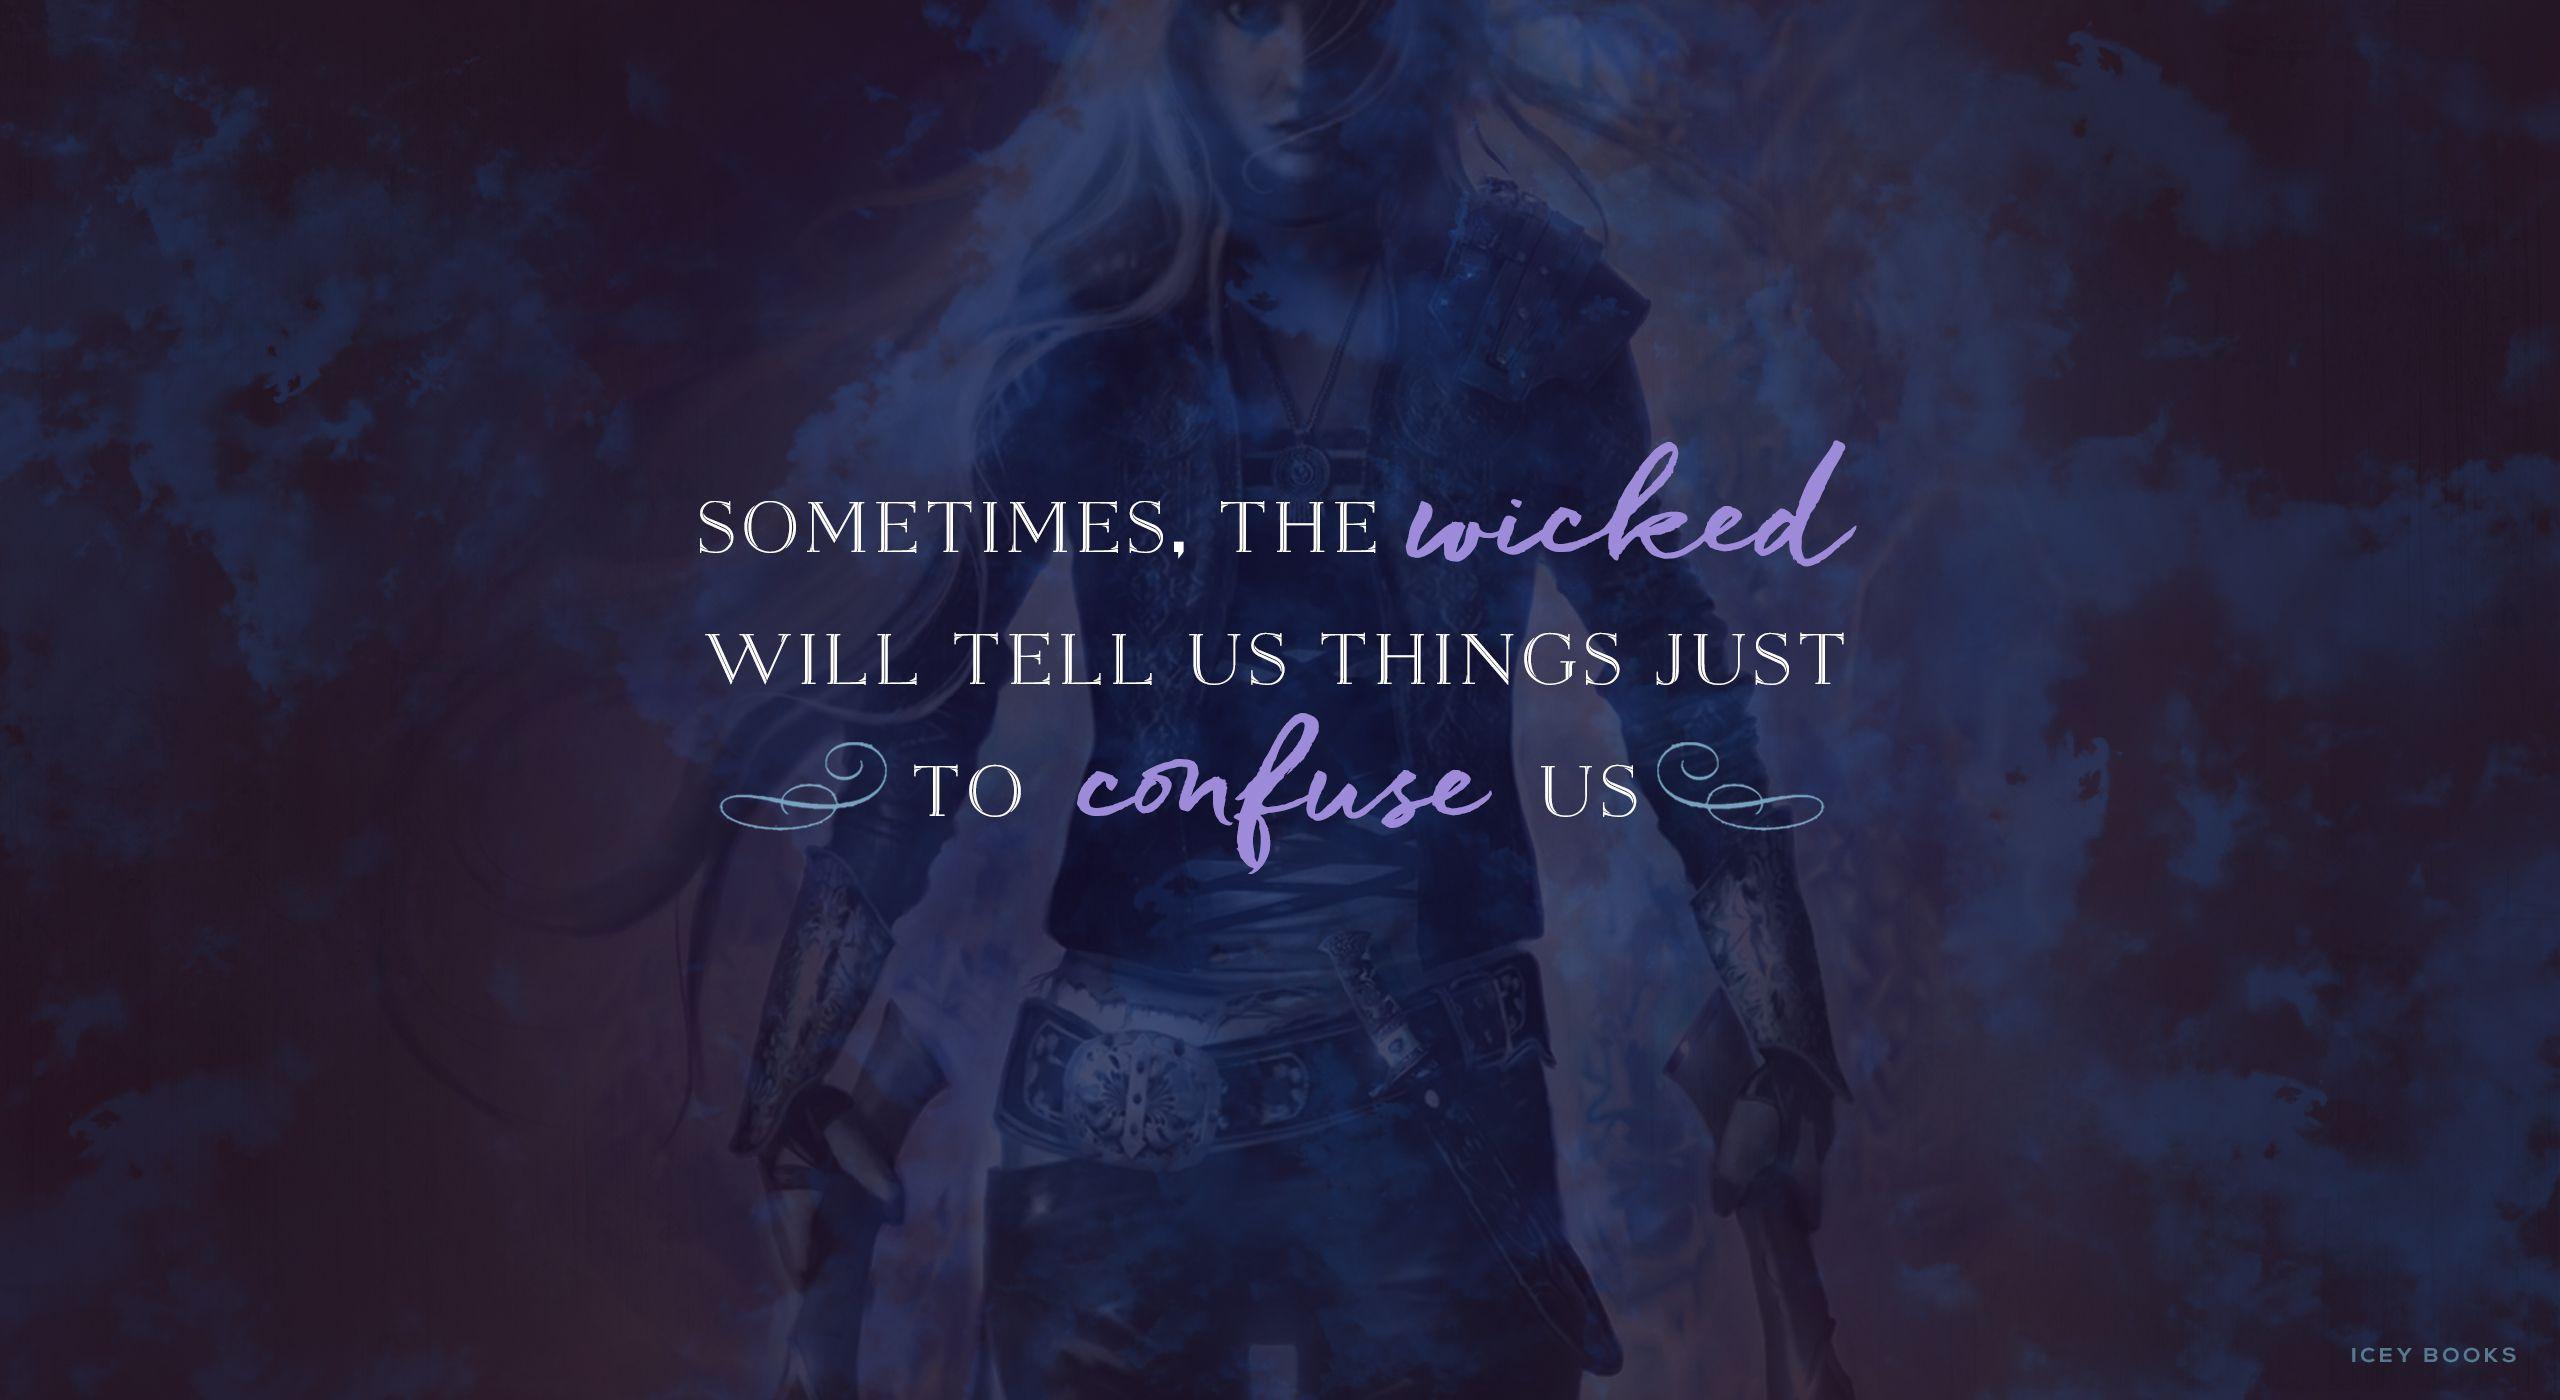 Throne of glass wallpapers